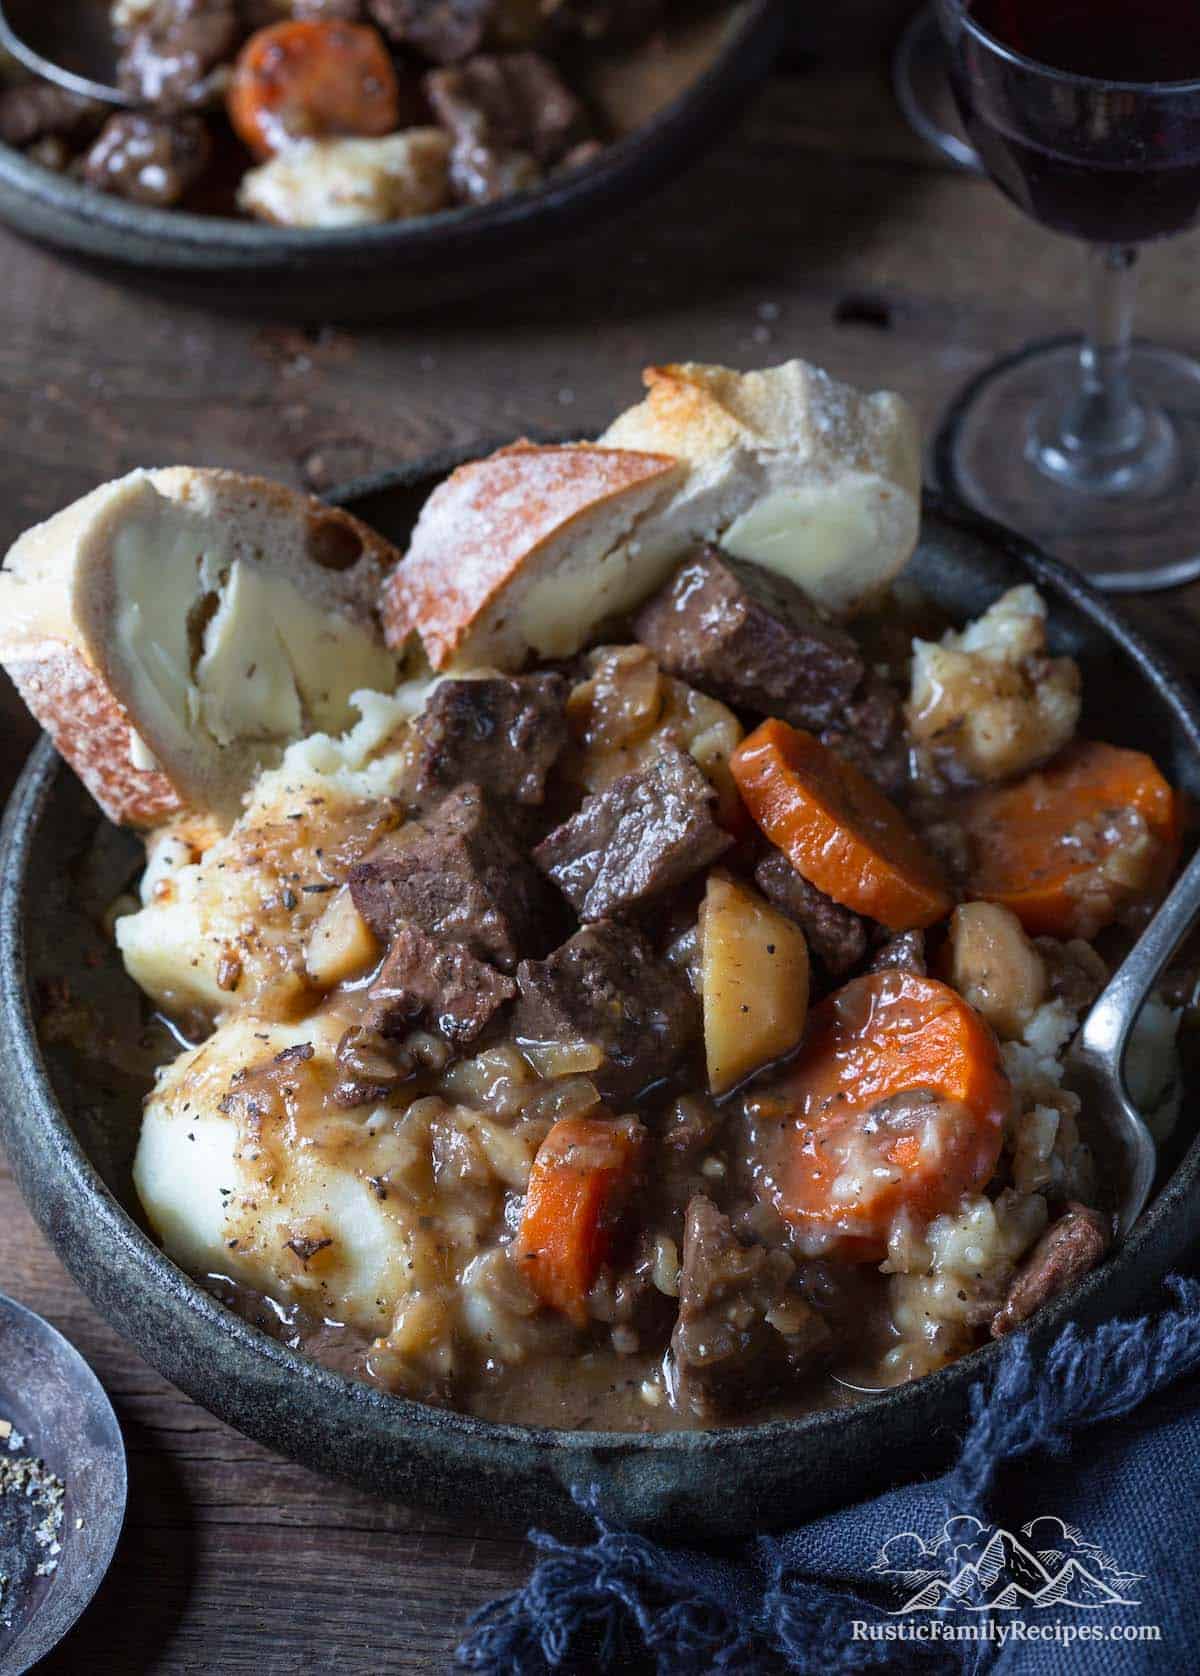 A bowl filled with venison stew, mashed potatoes and crusty bread slices